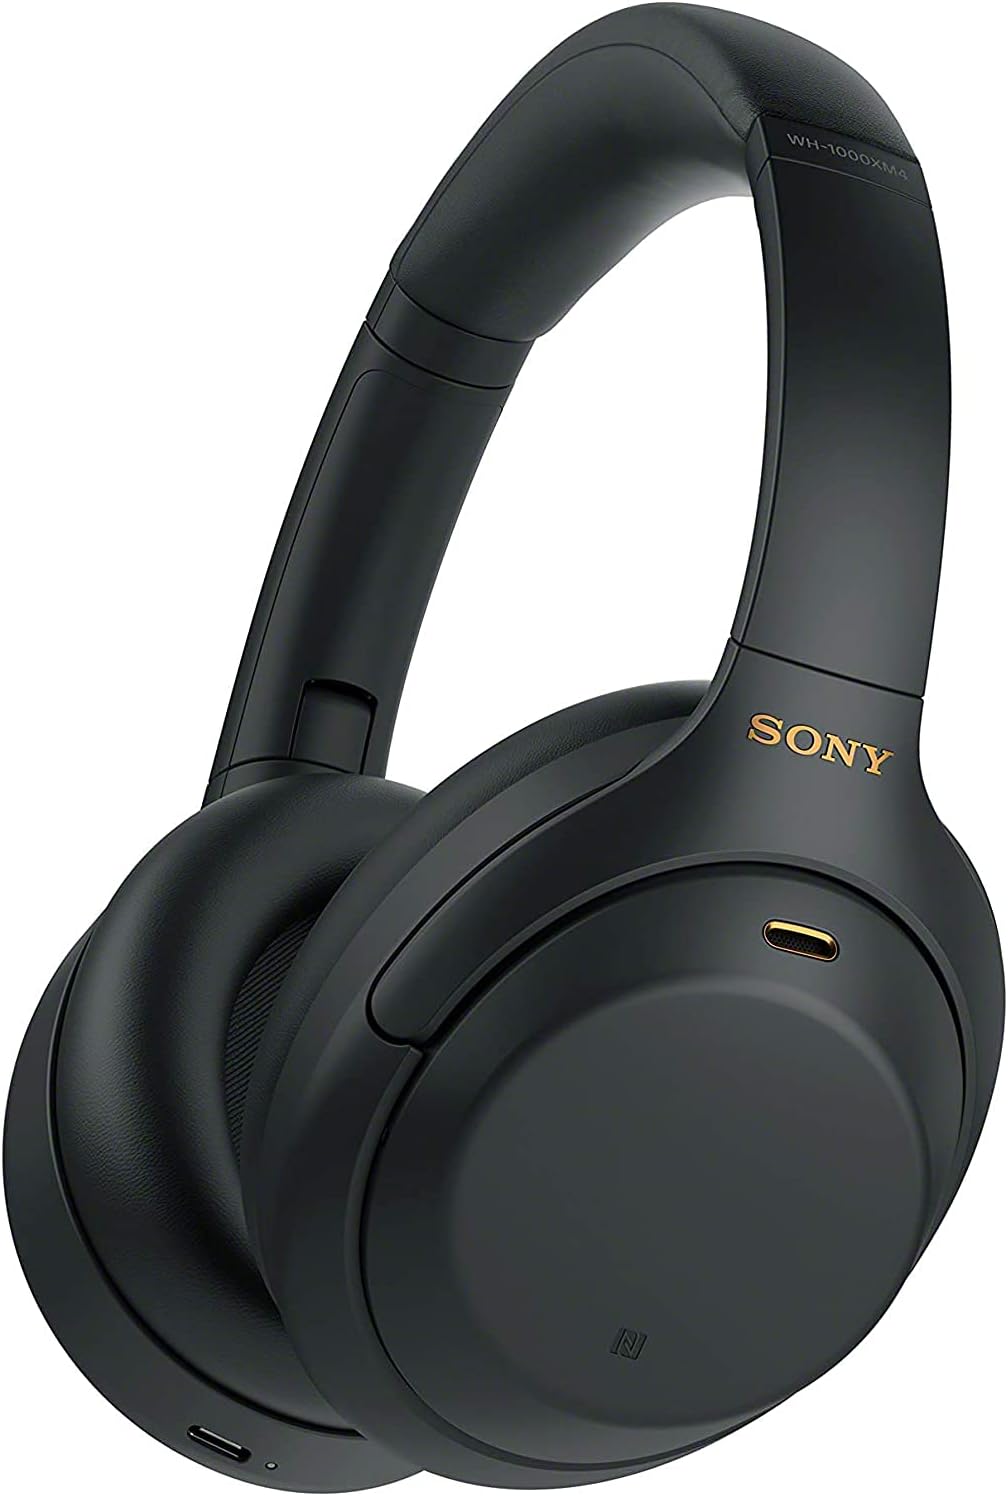 Sony WH-1000XM4 Review: Experience Unmatched Audio Quality with these Headphones